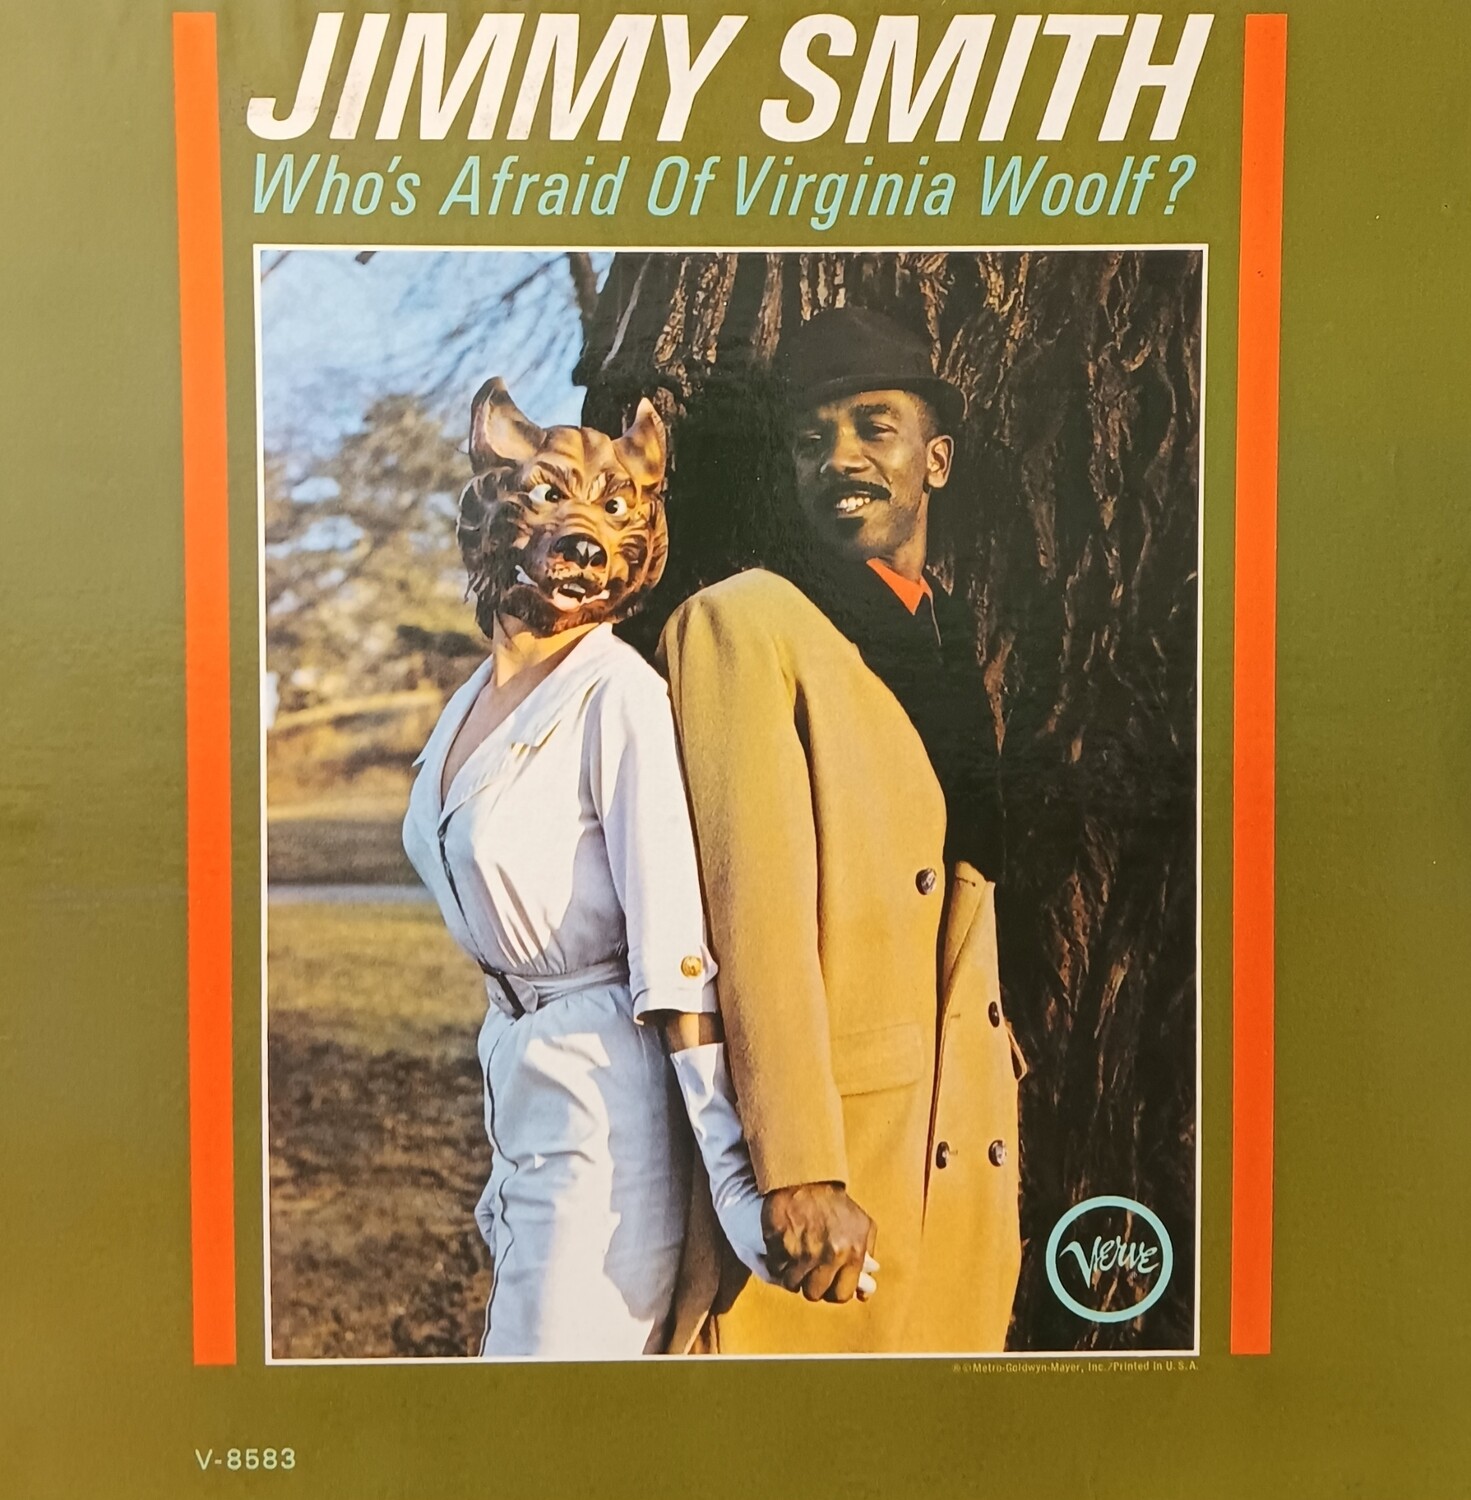 JIMMY SMITH - Who's afraid of Virginia Woolf